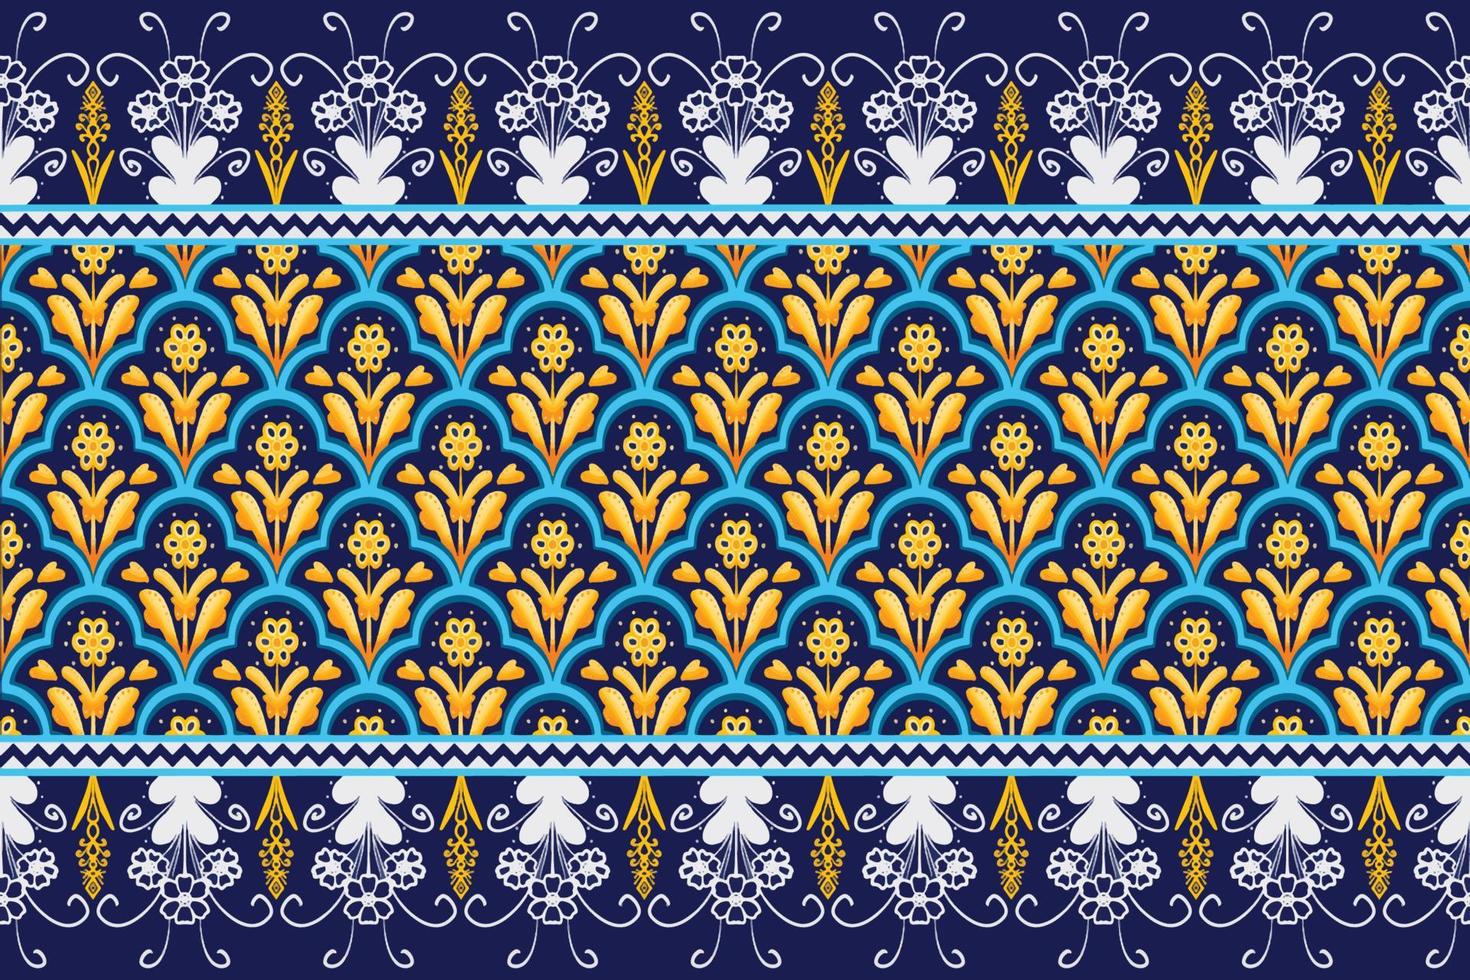 Yellow Flower on Navy Blue, White Geometric ethnic oriental pattern traditional Design for background,carpet,wallpaper,clothing,wrapping,Batik,fabric, vector illustration embroidery style